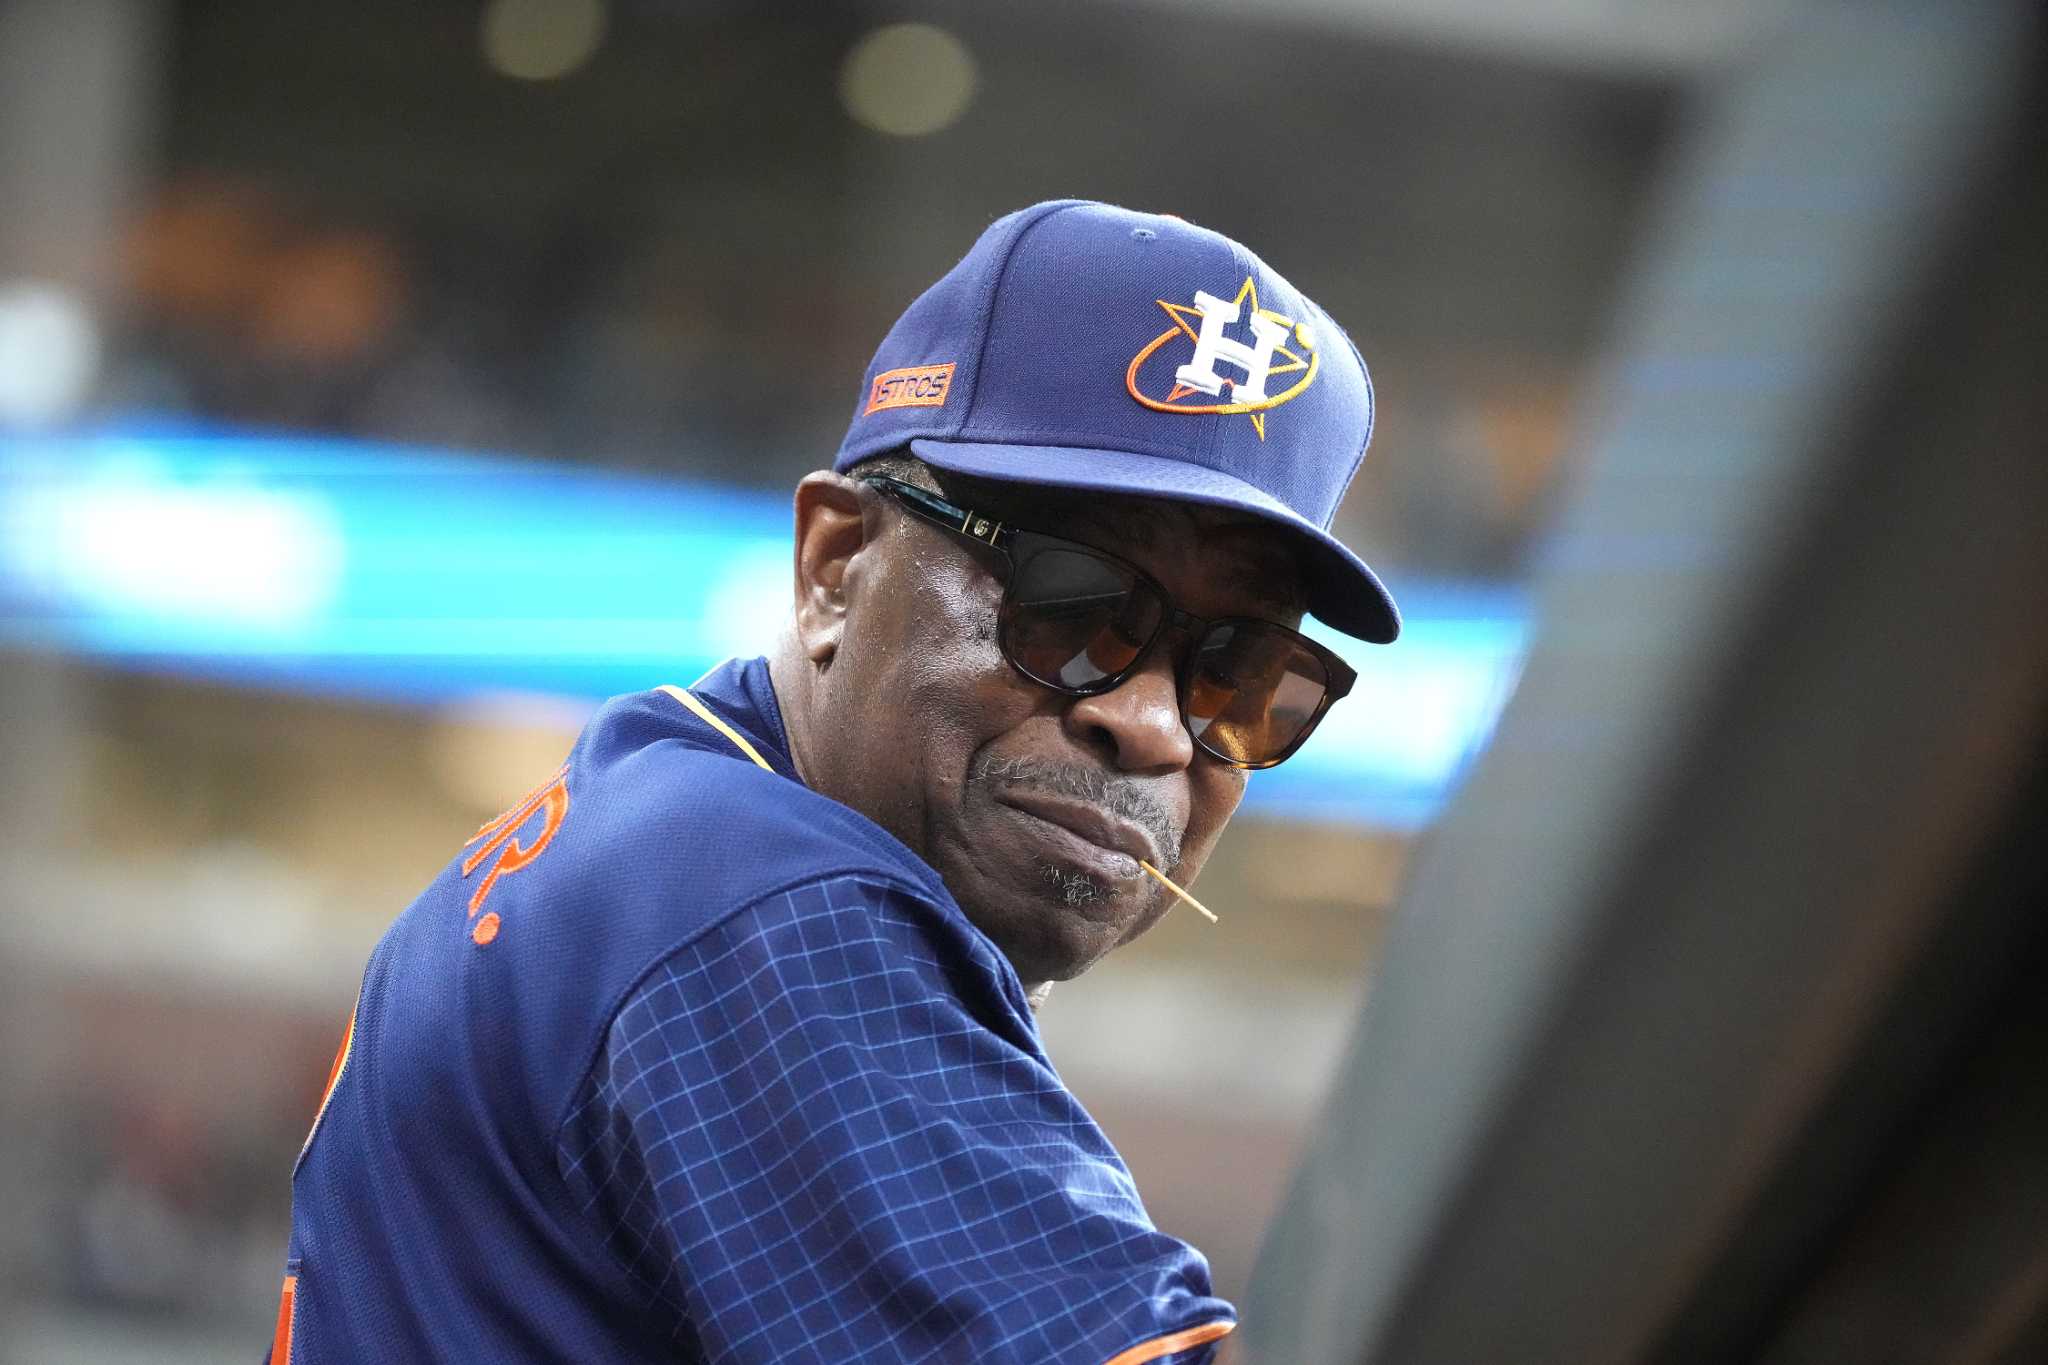 Dusty Baker talks about the boos sure to come Astros' way at All